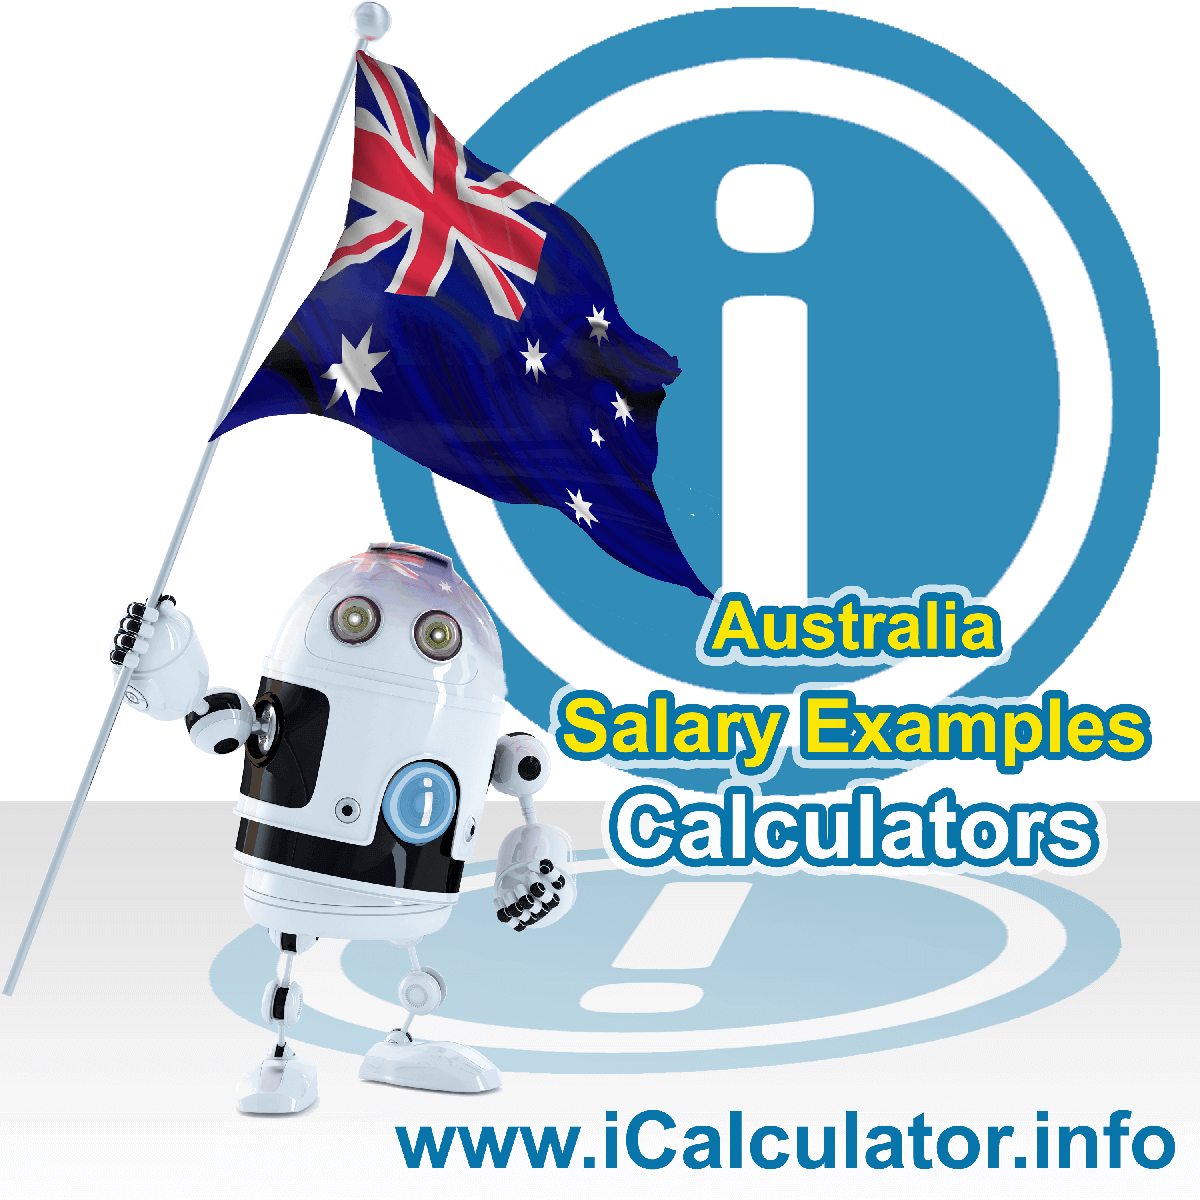 Australia Salary Example for $200.03k. This image shows the Australian flag and information relating to the tax formula used for calculating income tax in Australia using the Australia Tax Calculator in 2023